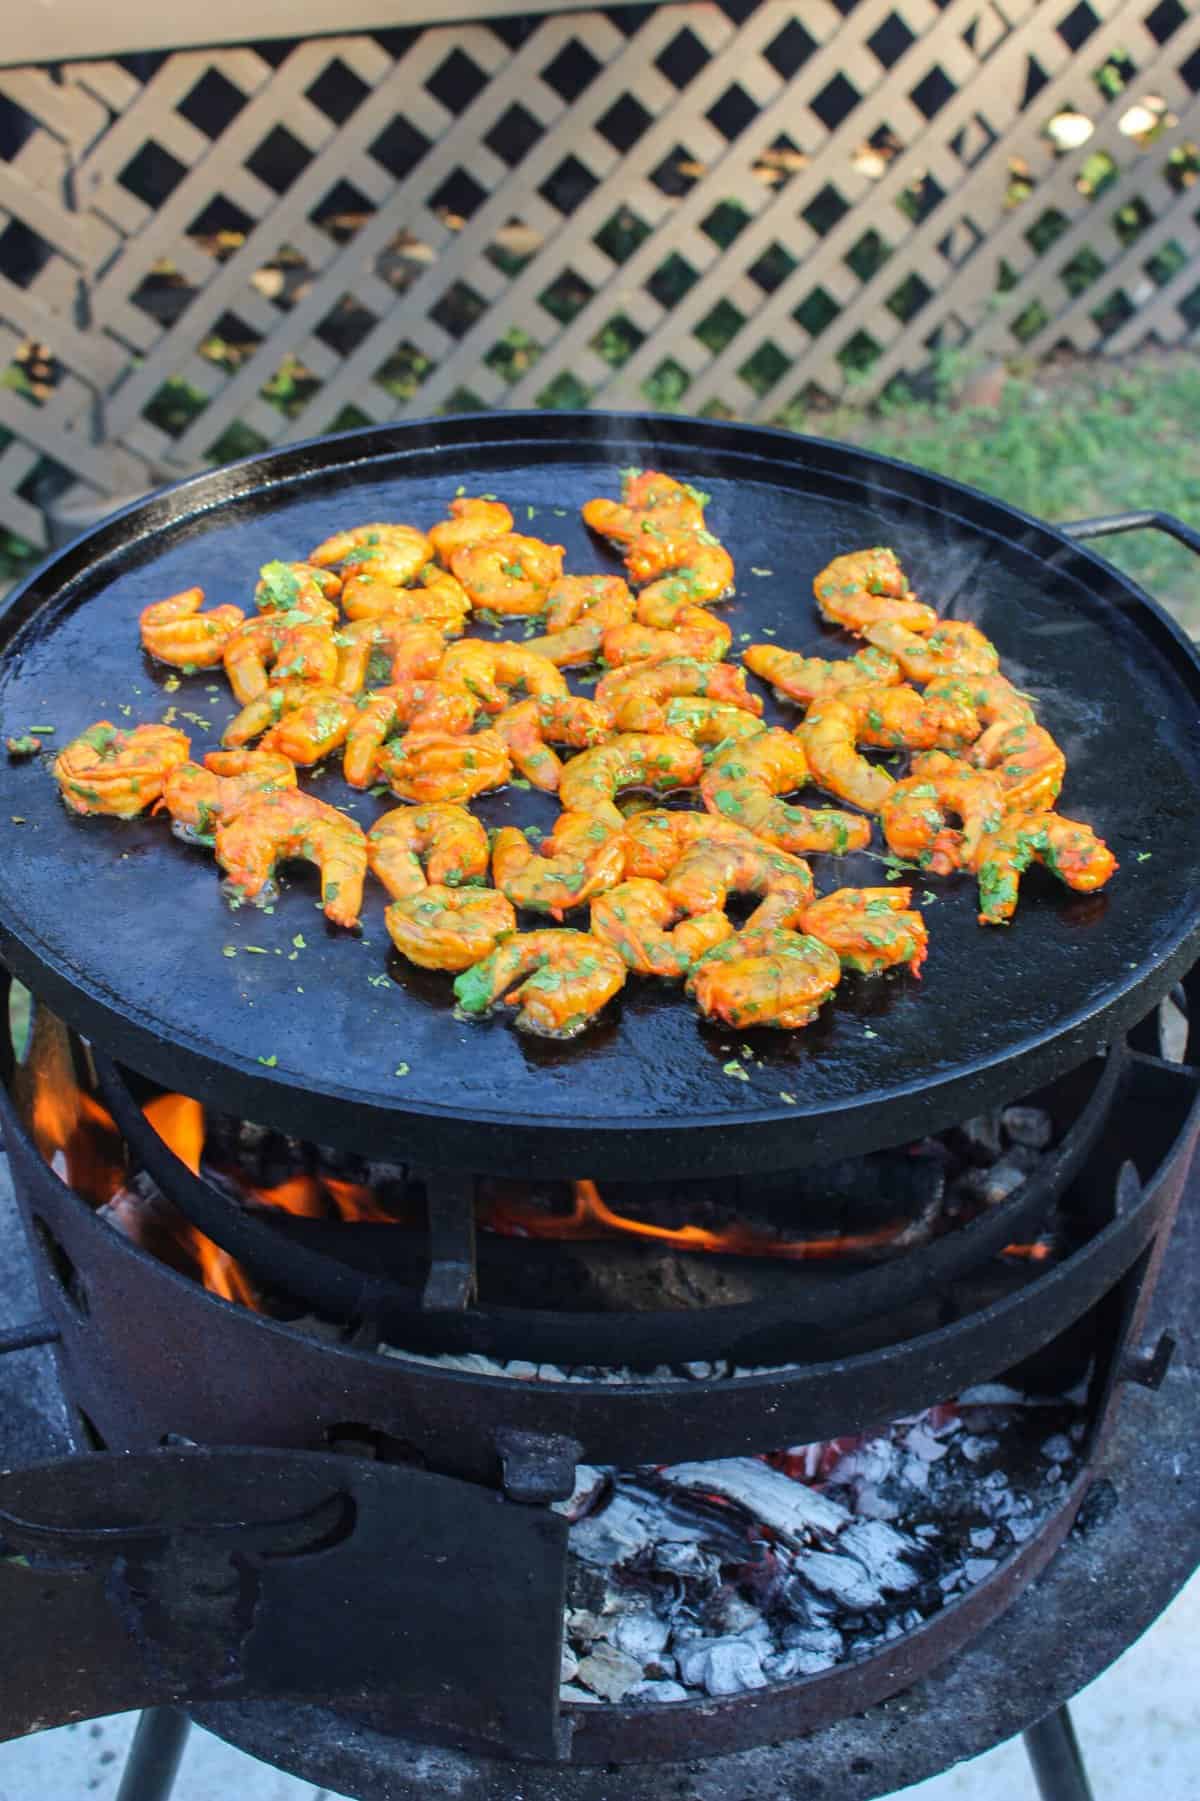 shrimp being cooked on a large plancha